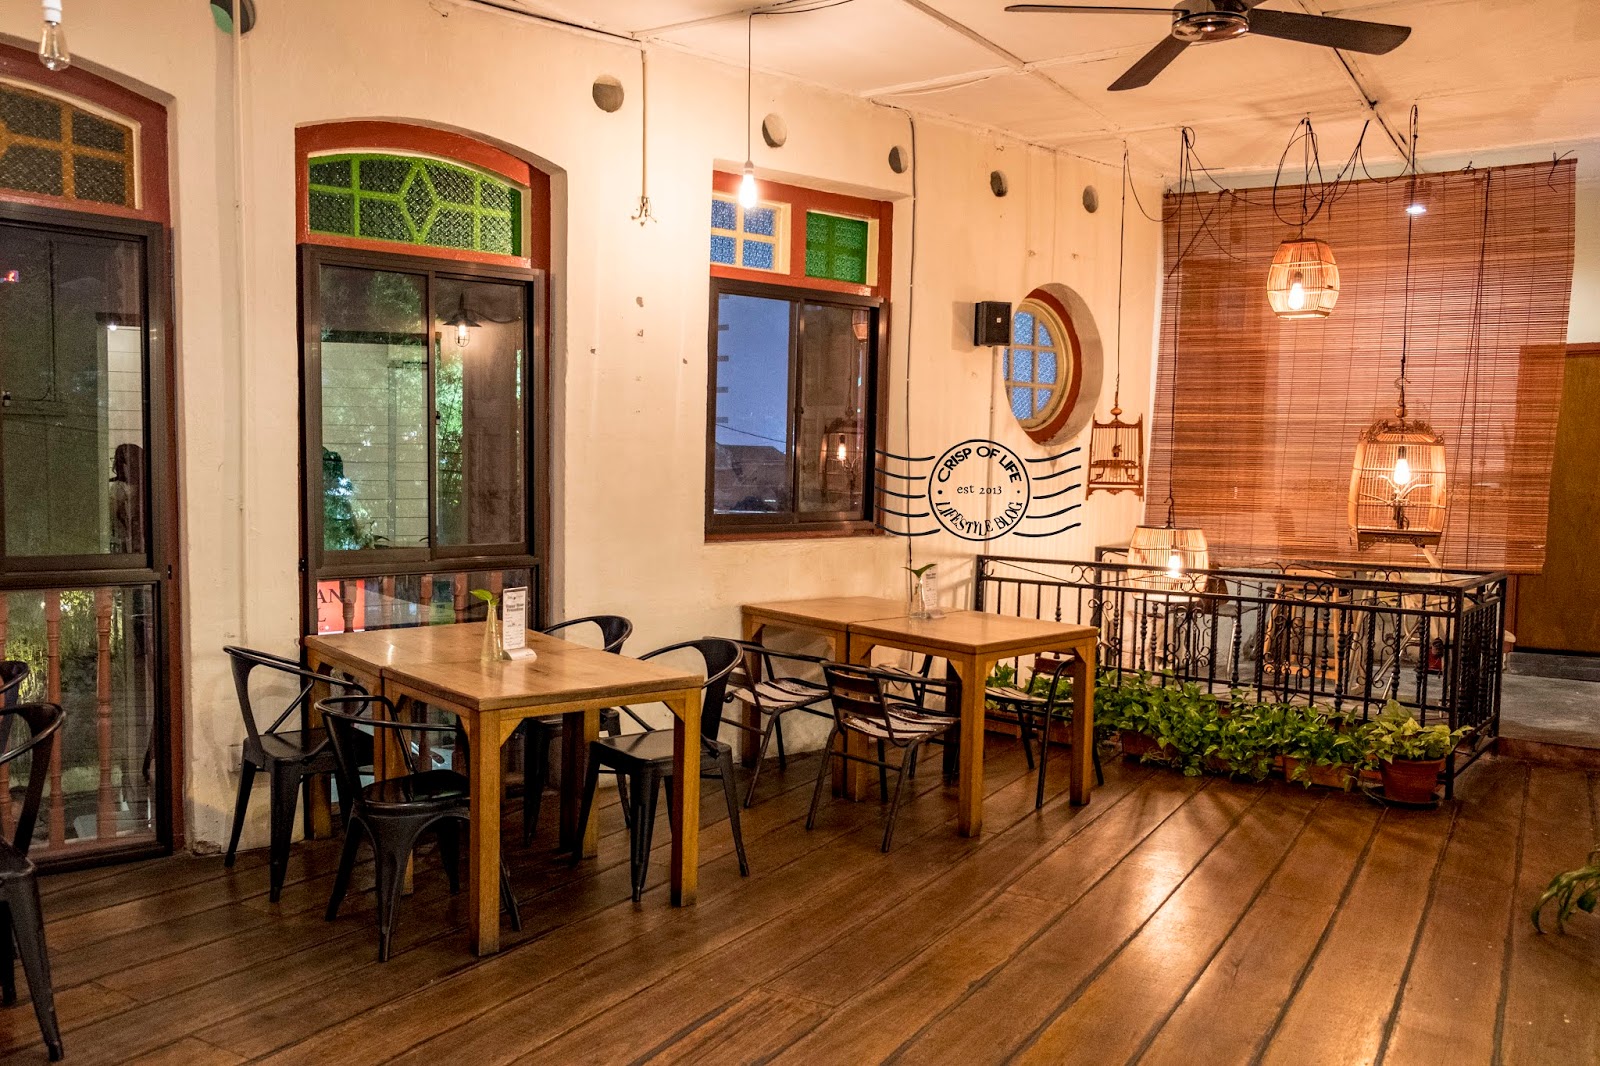 Gala House Restaurant and Bar @ Muntri Street, Georgetown, Penang for beer and Asian Western fusion cuisine.